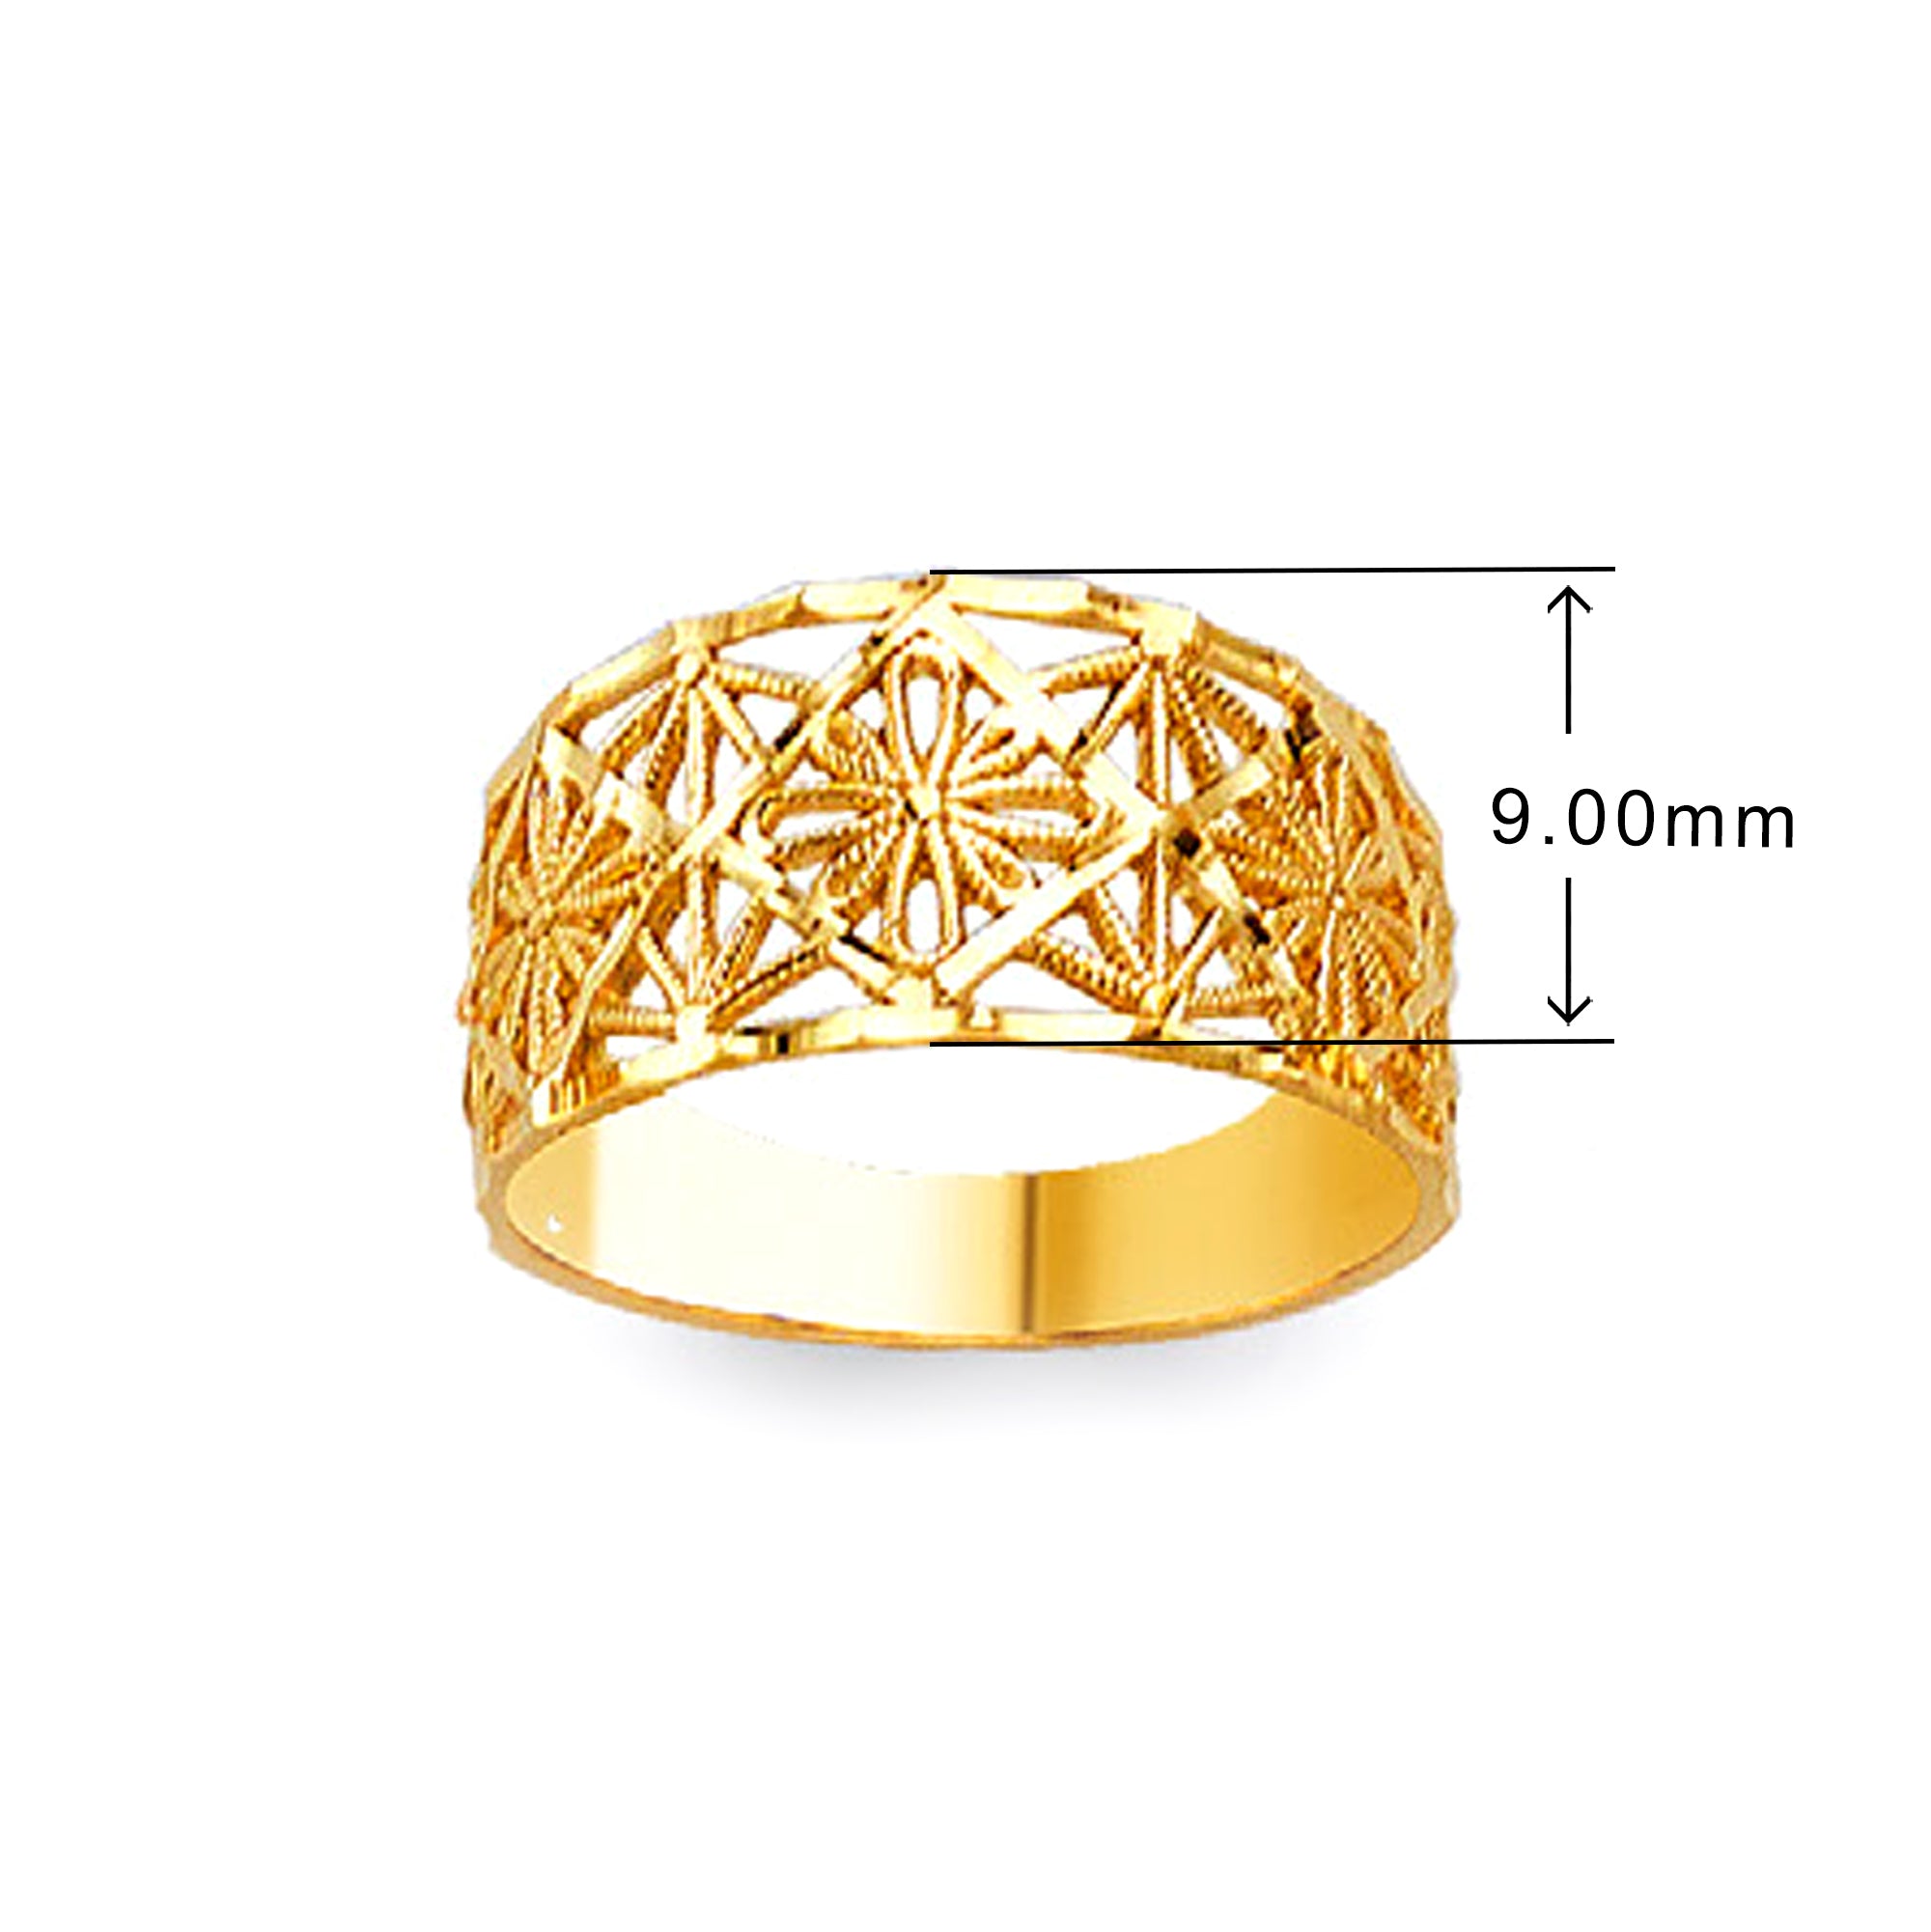 Lattice Love Band in Solid Gold with Measurement